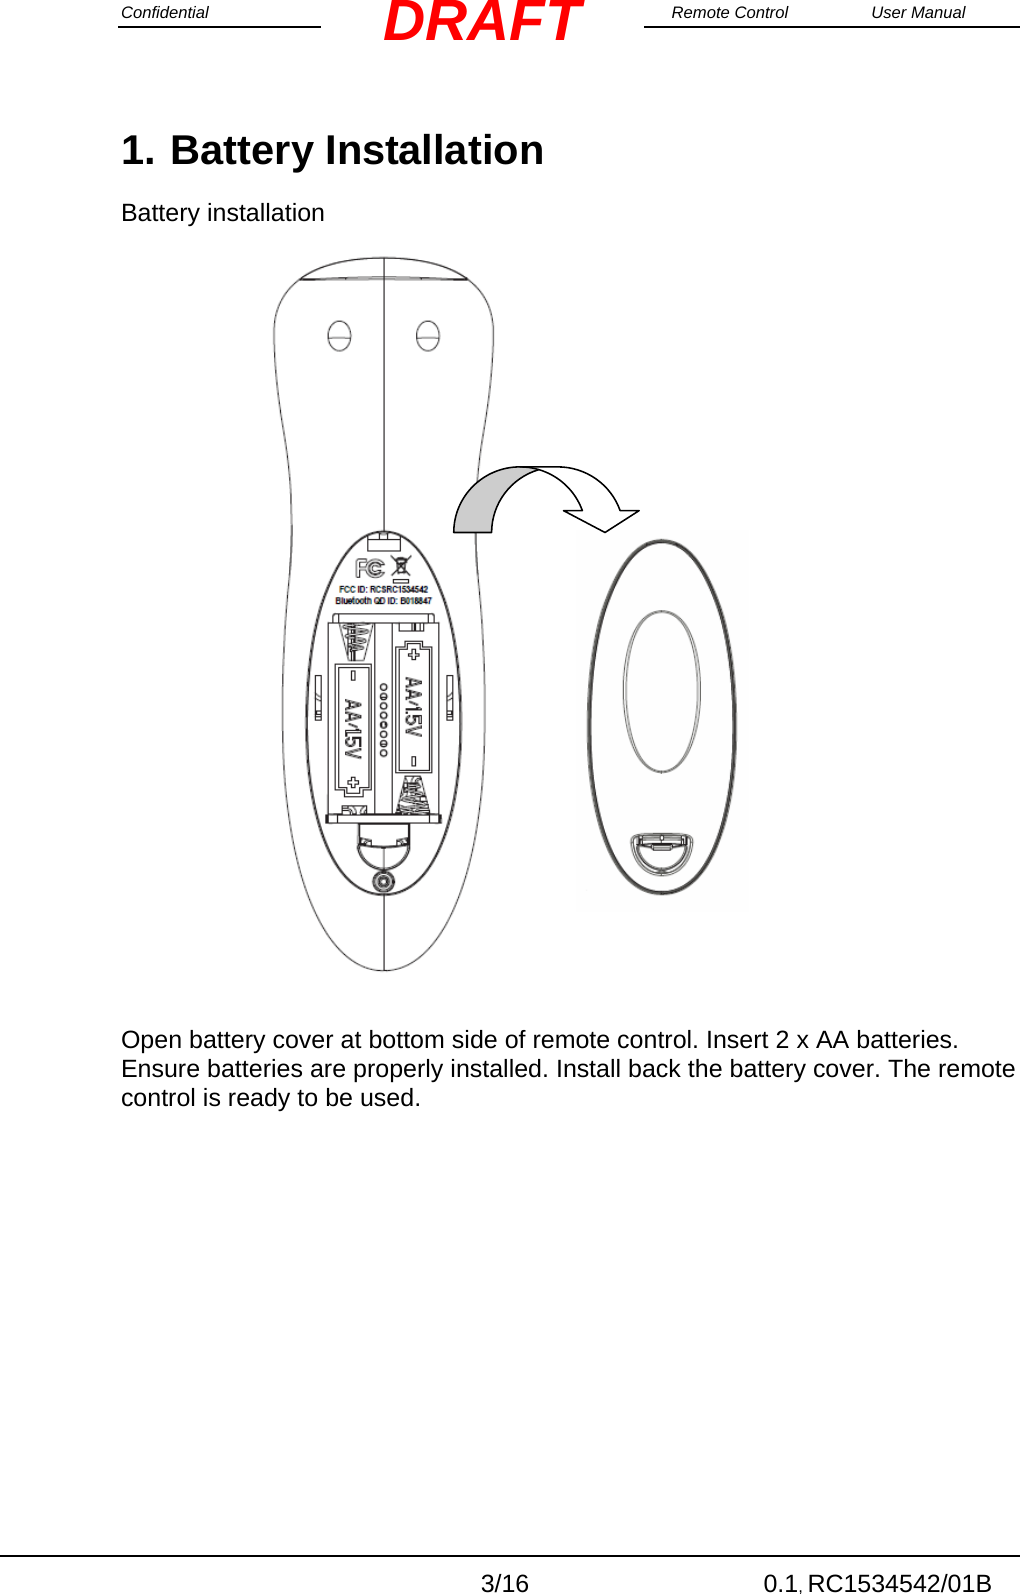 Confidential                                                                                                    Remote Control  User Manual  3/16 0.1, RC1534542/01B DRAFT1. Battery Installation Battery installation                        Open battery cover at bottom side of remote control. Insert 2 x AA batteries. Ensure batteries are properly installed. Install back the battery cover. The remote control is ready to be used. 